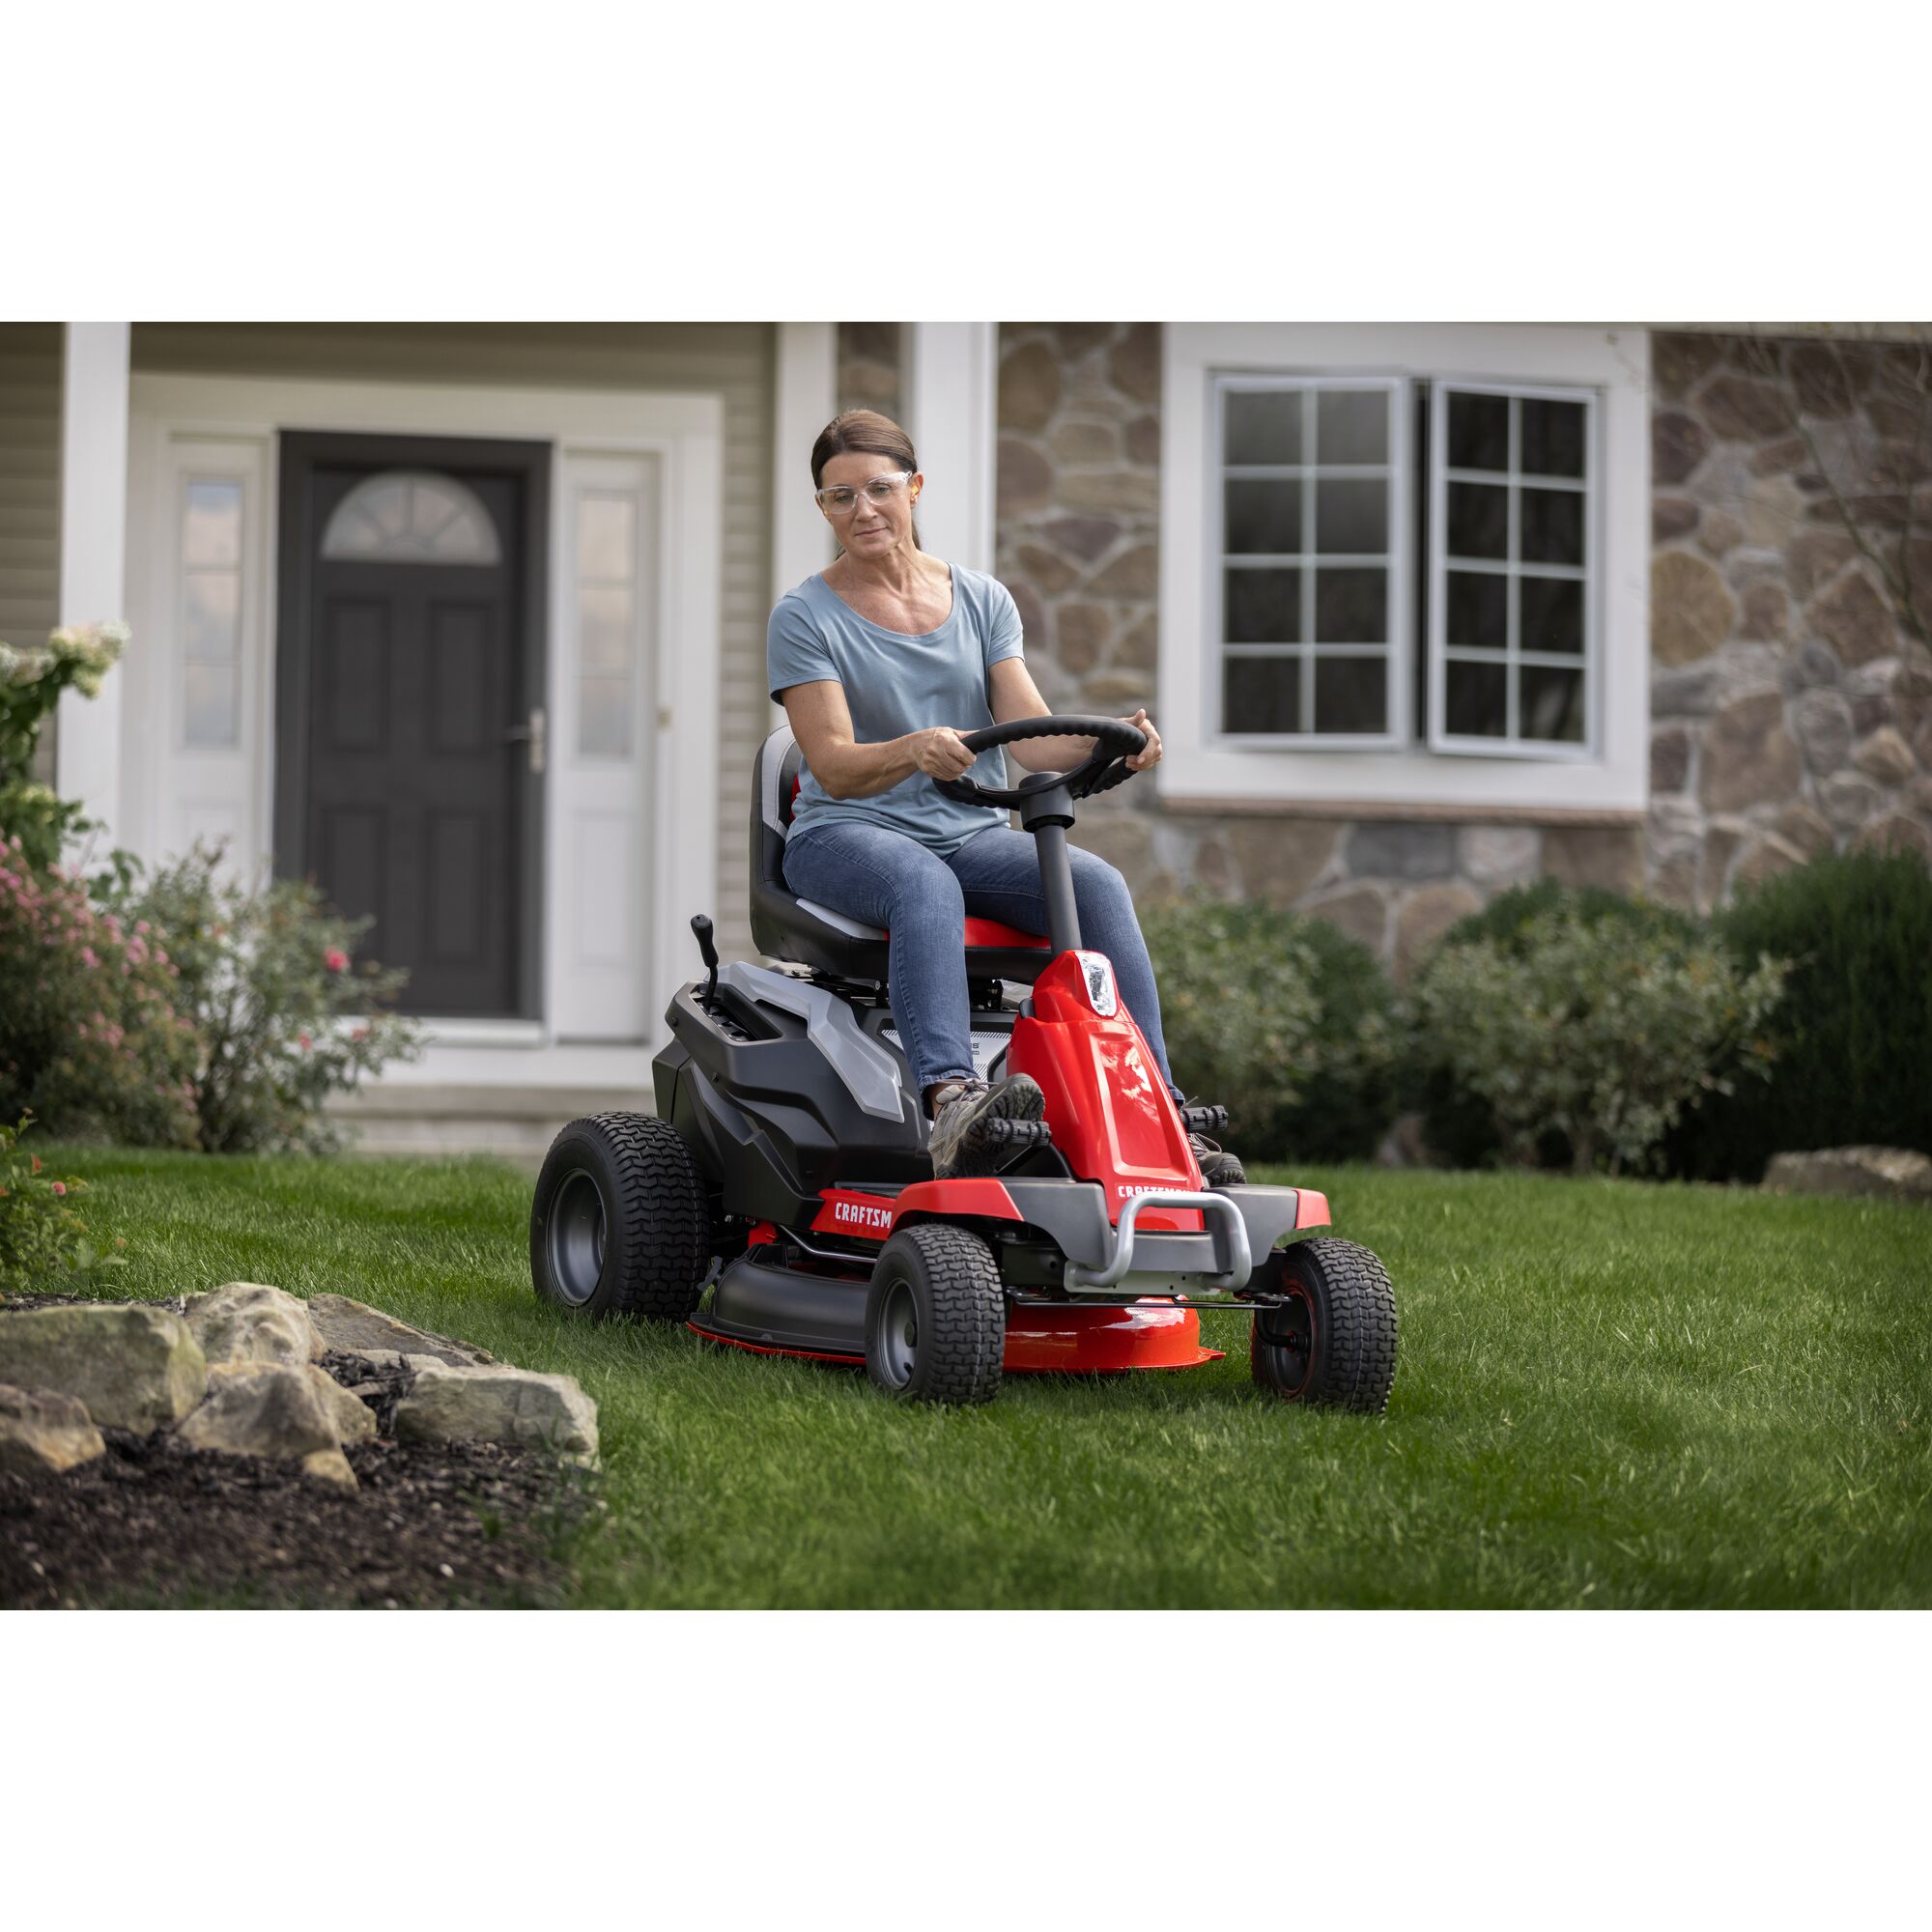 CRAFTSMAN Battery-Powered Compact Mower cutting grass around flowerbed with house in background